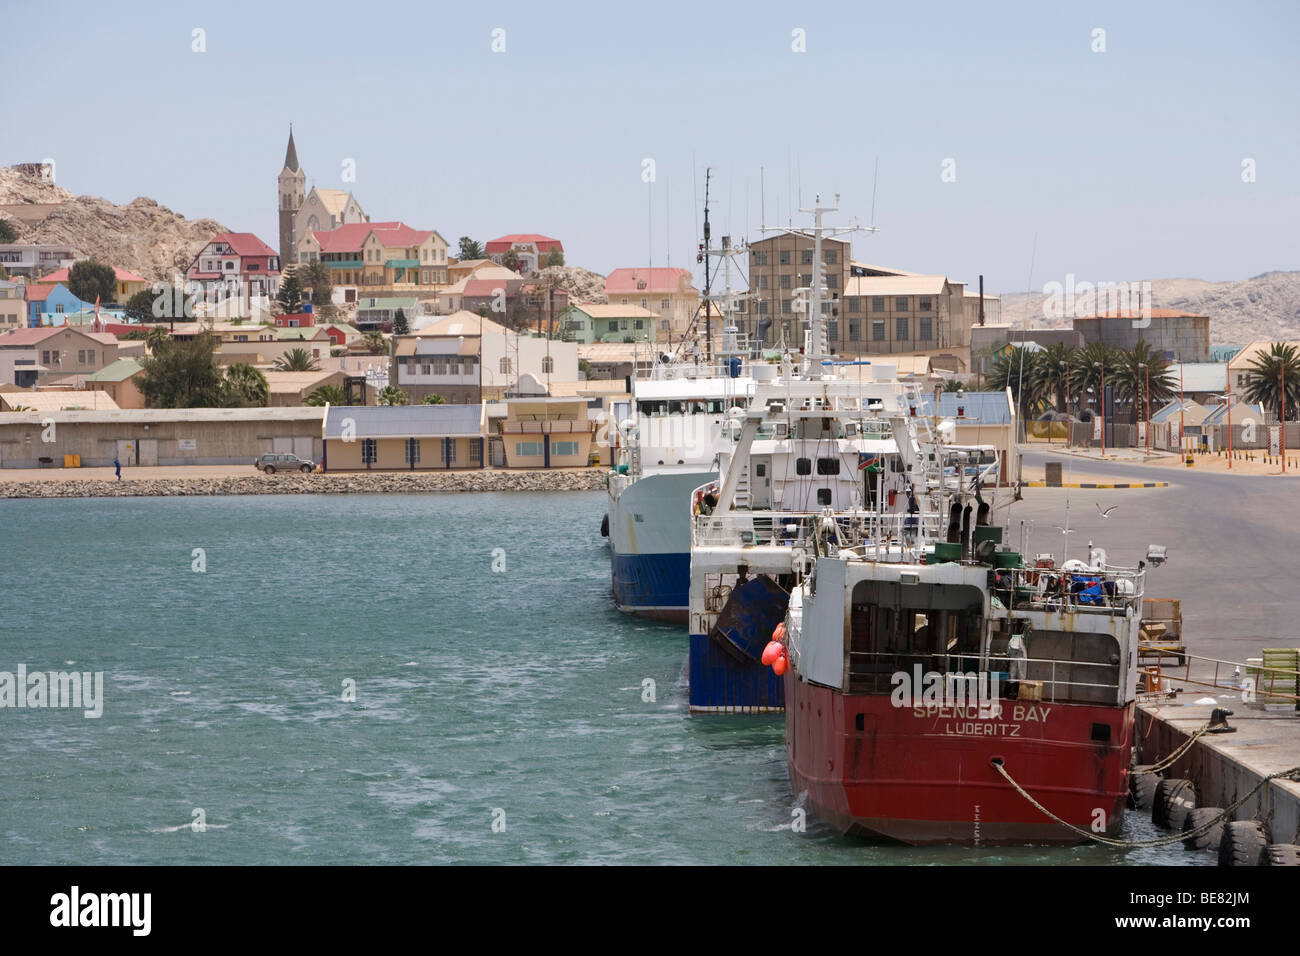 Fishing Boats and Town, Luederitz, Karas, Namibia, Africa Stock Photo